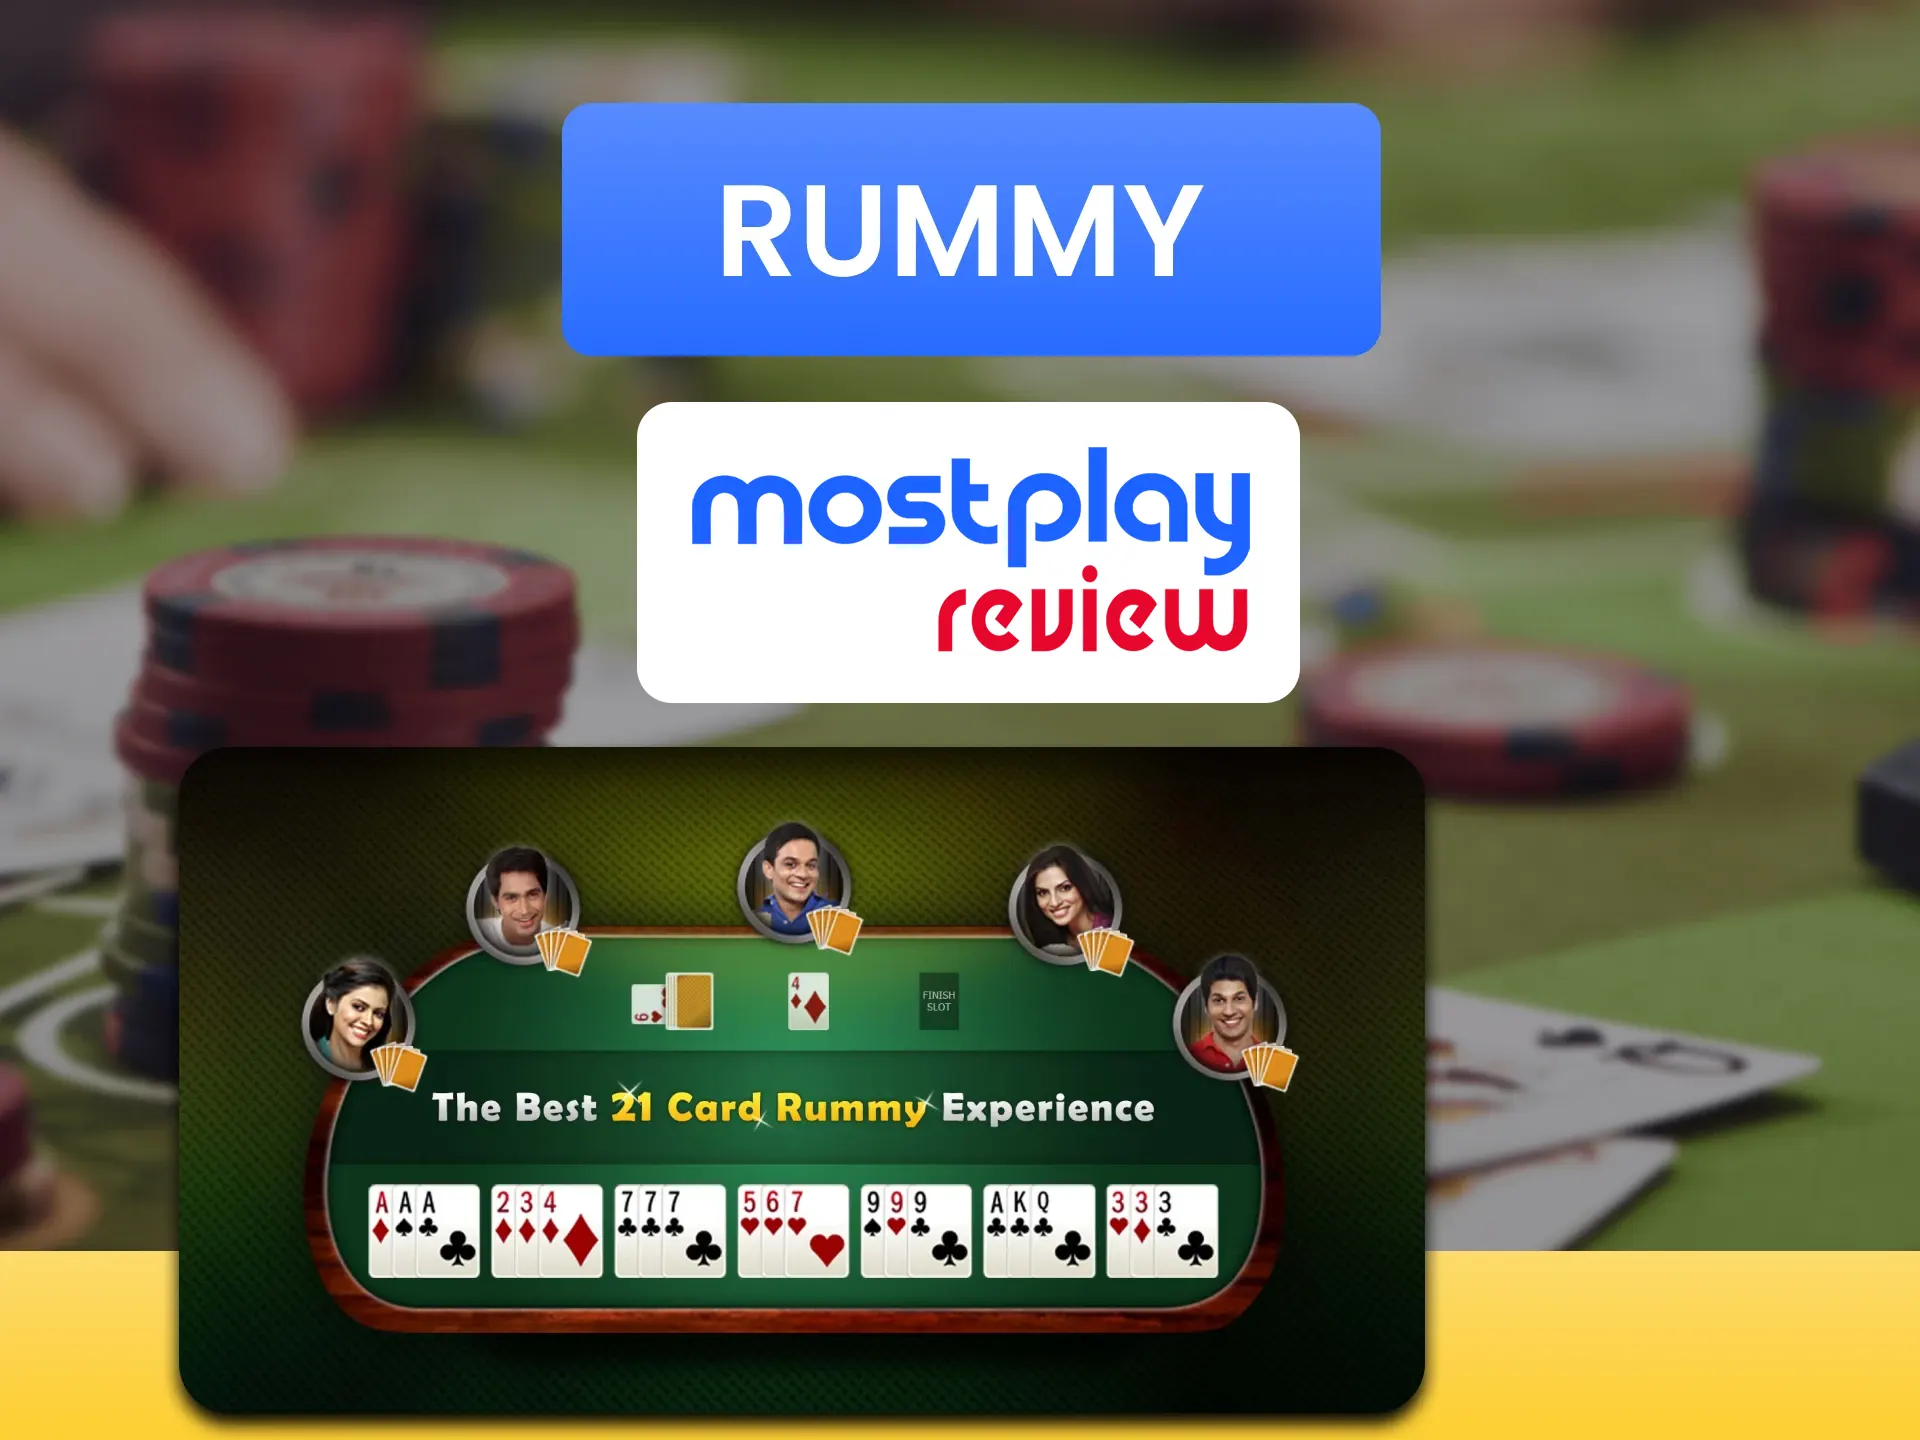 Play a Rummy game with real people at the Mostplay casino.